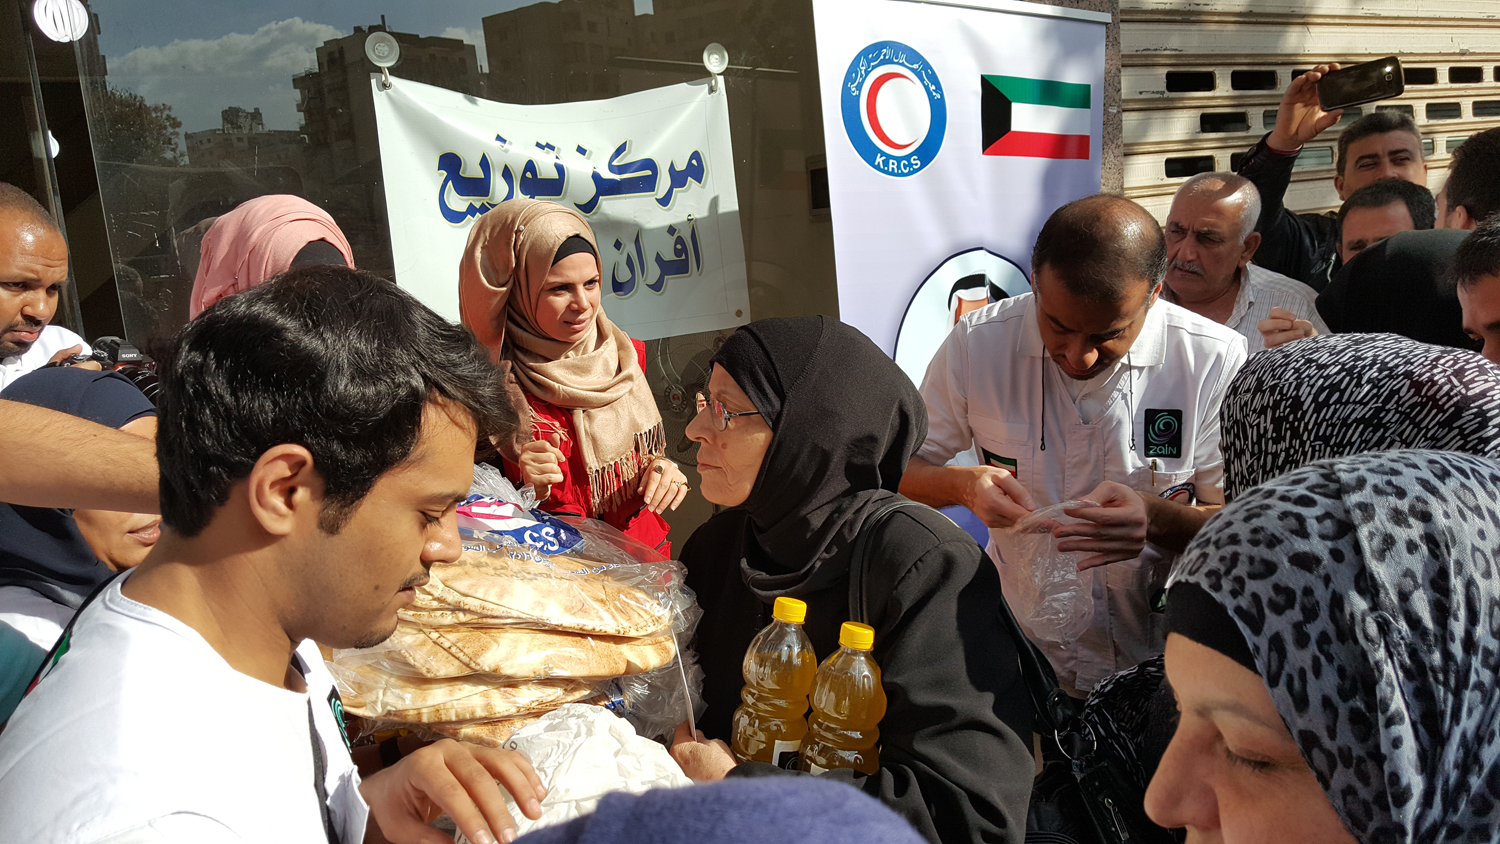 Kuwait Red Crescent Society, Zain telecom provide relief aid to Syrian refugees in Lebanon